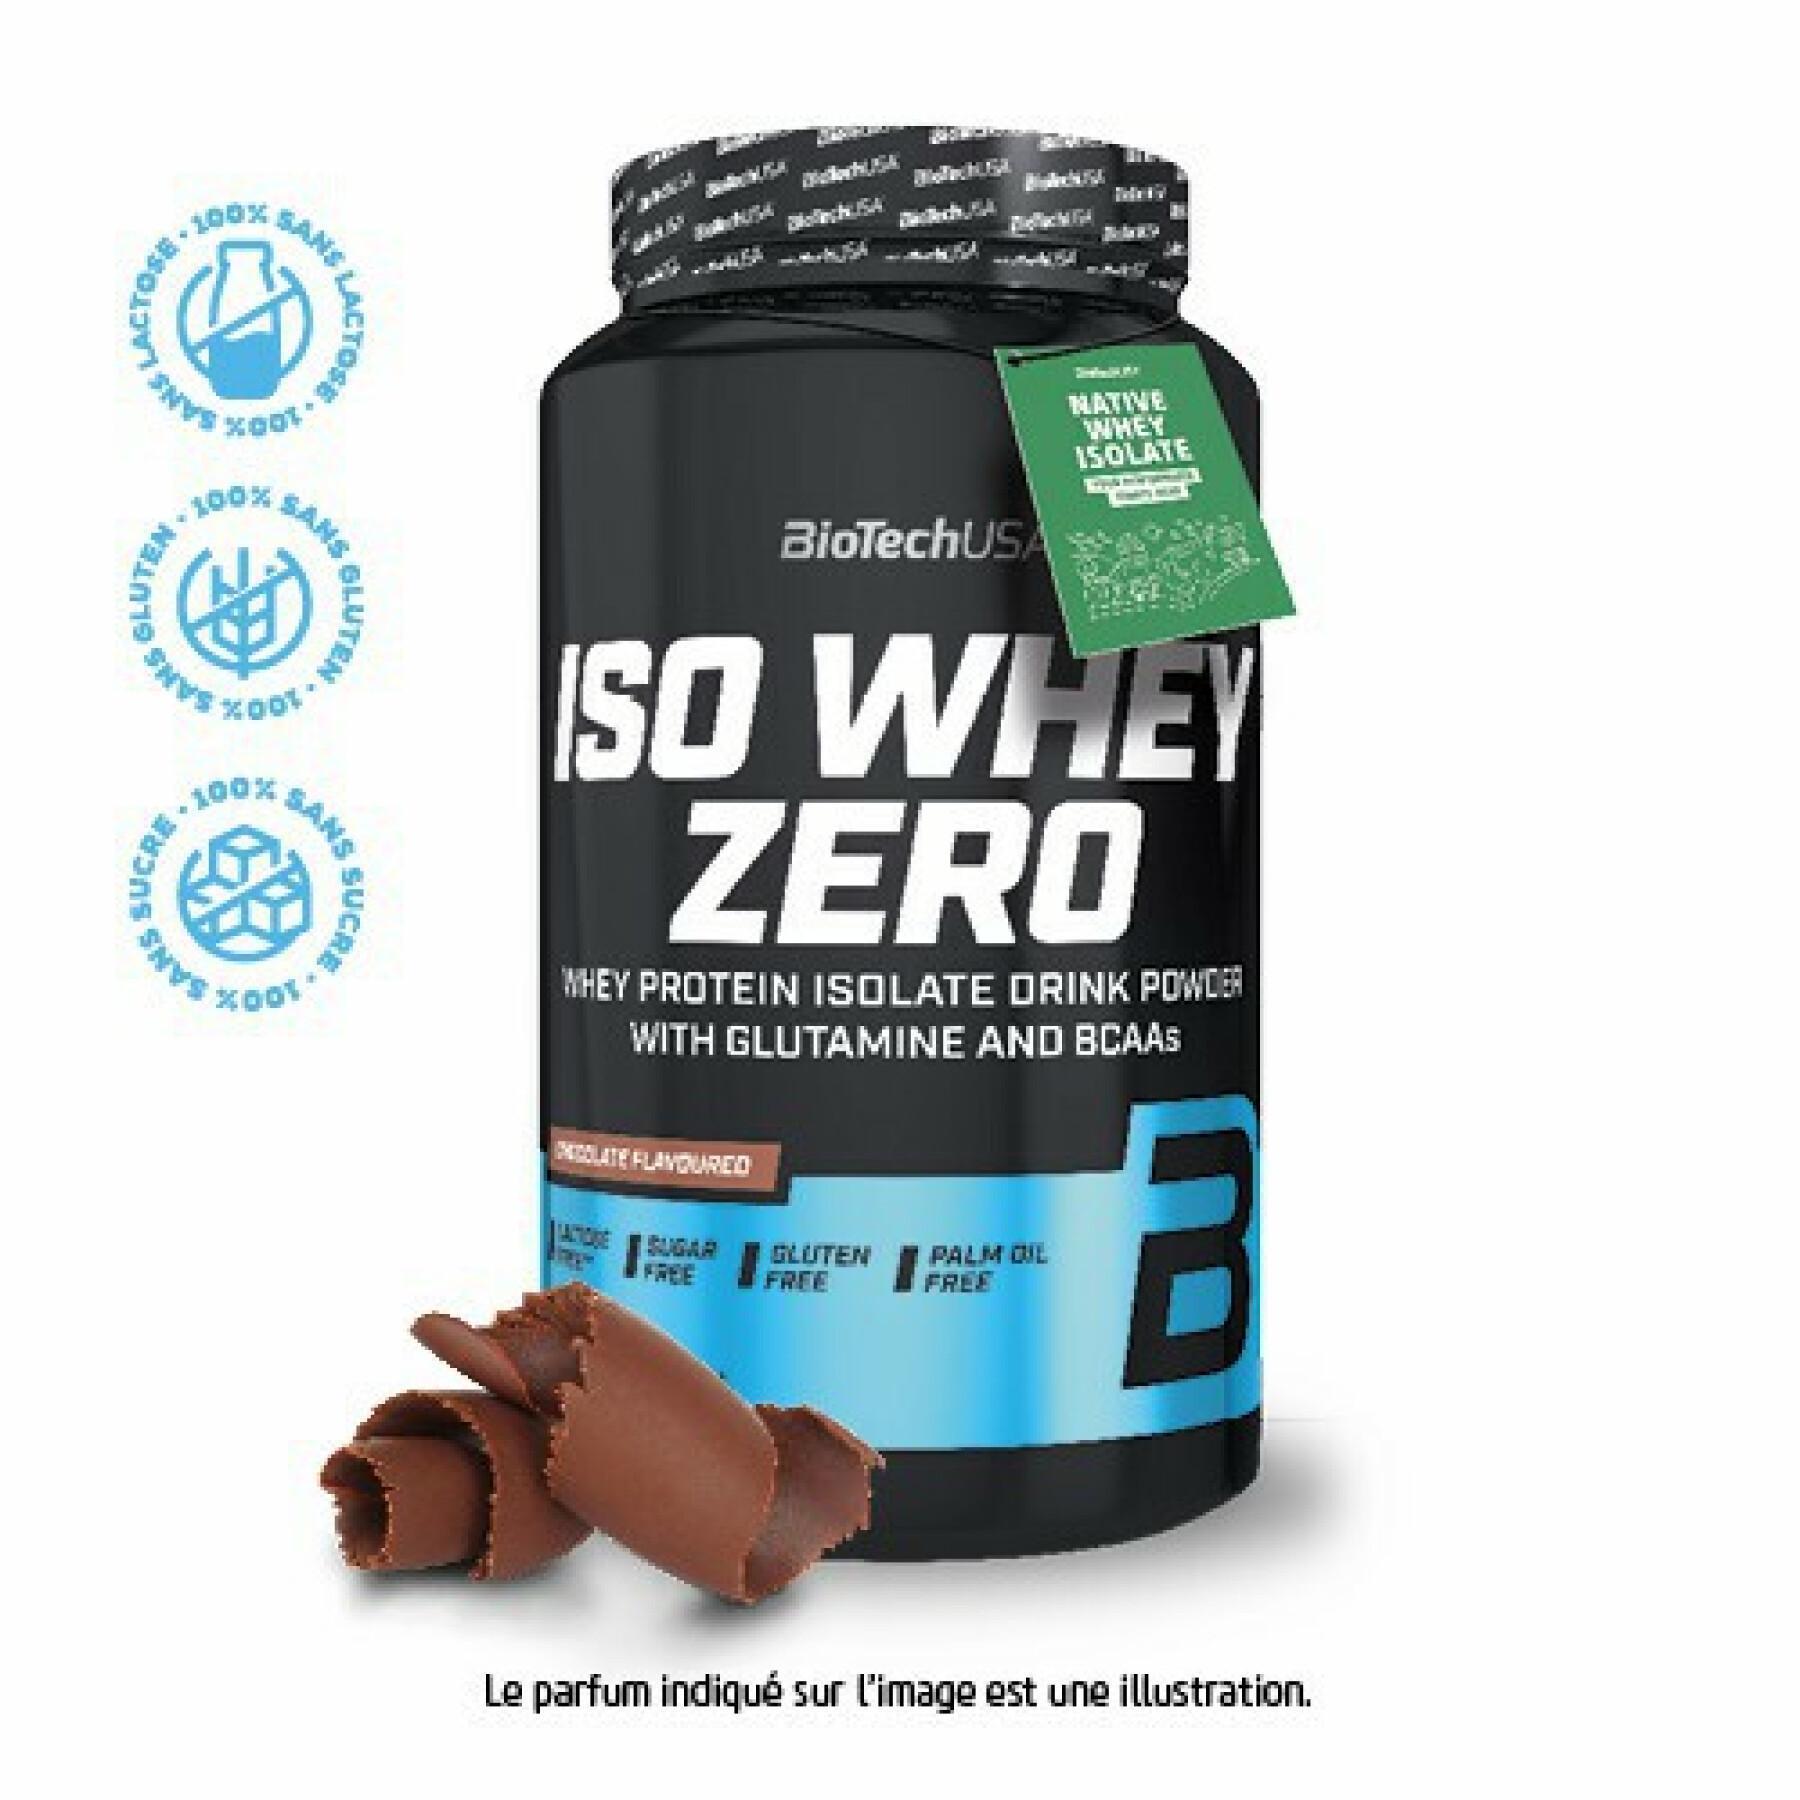 Pack of 6 jars of protein Biotech USA iso whey zero lactose free - Chocolate 908g